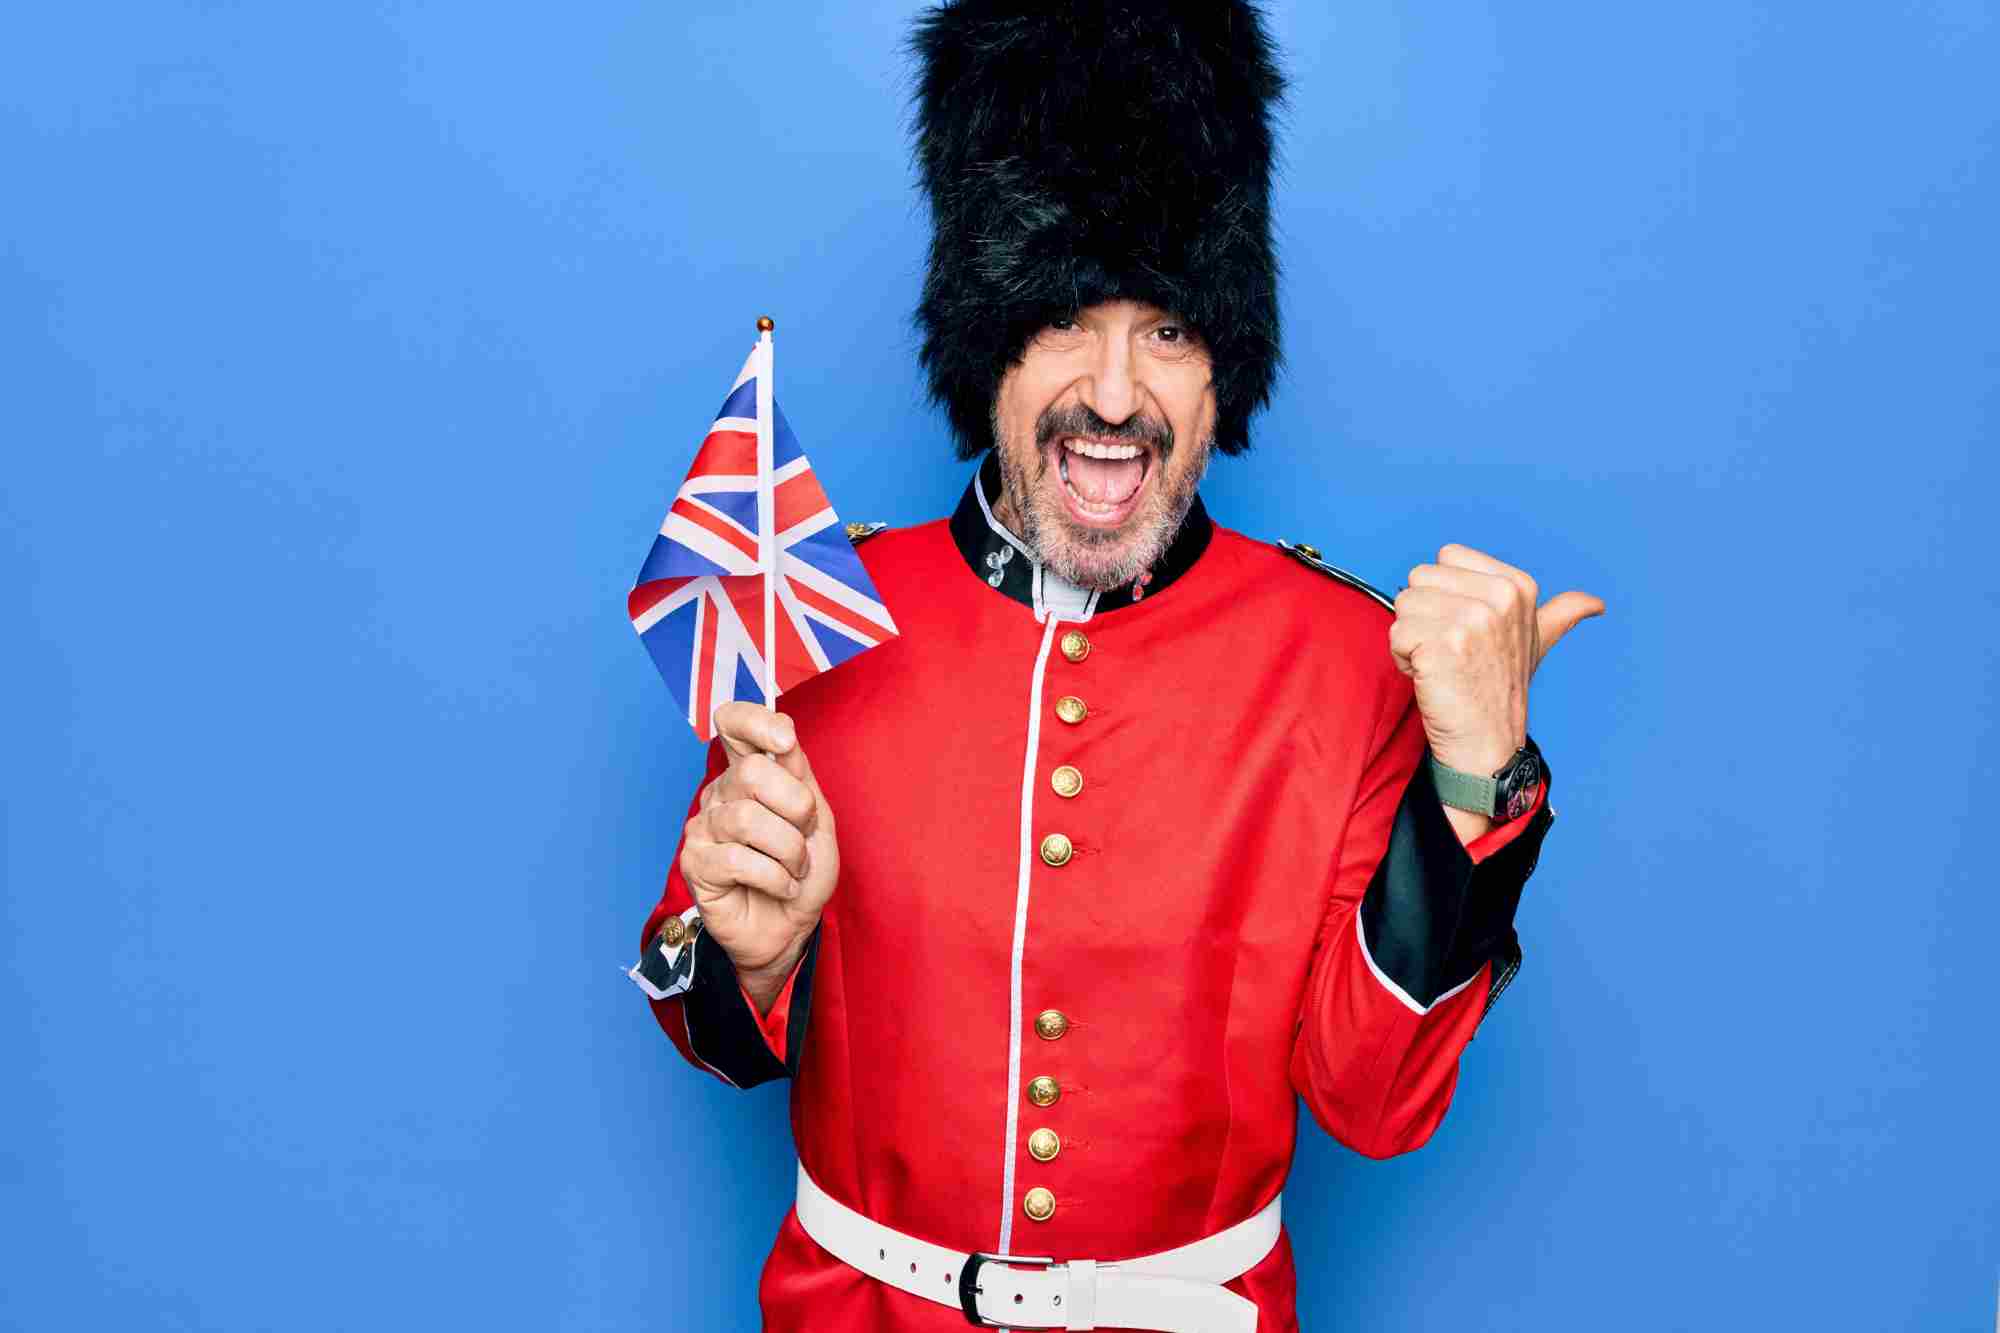 man dressed as a beefeater, laughing